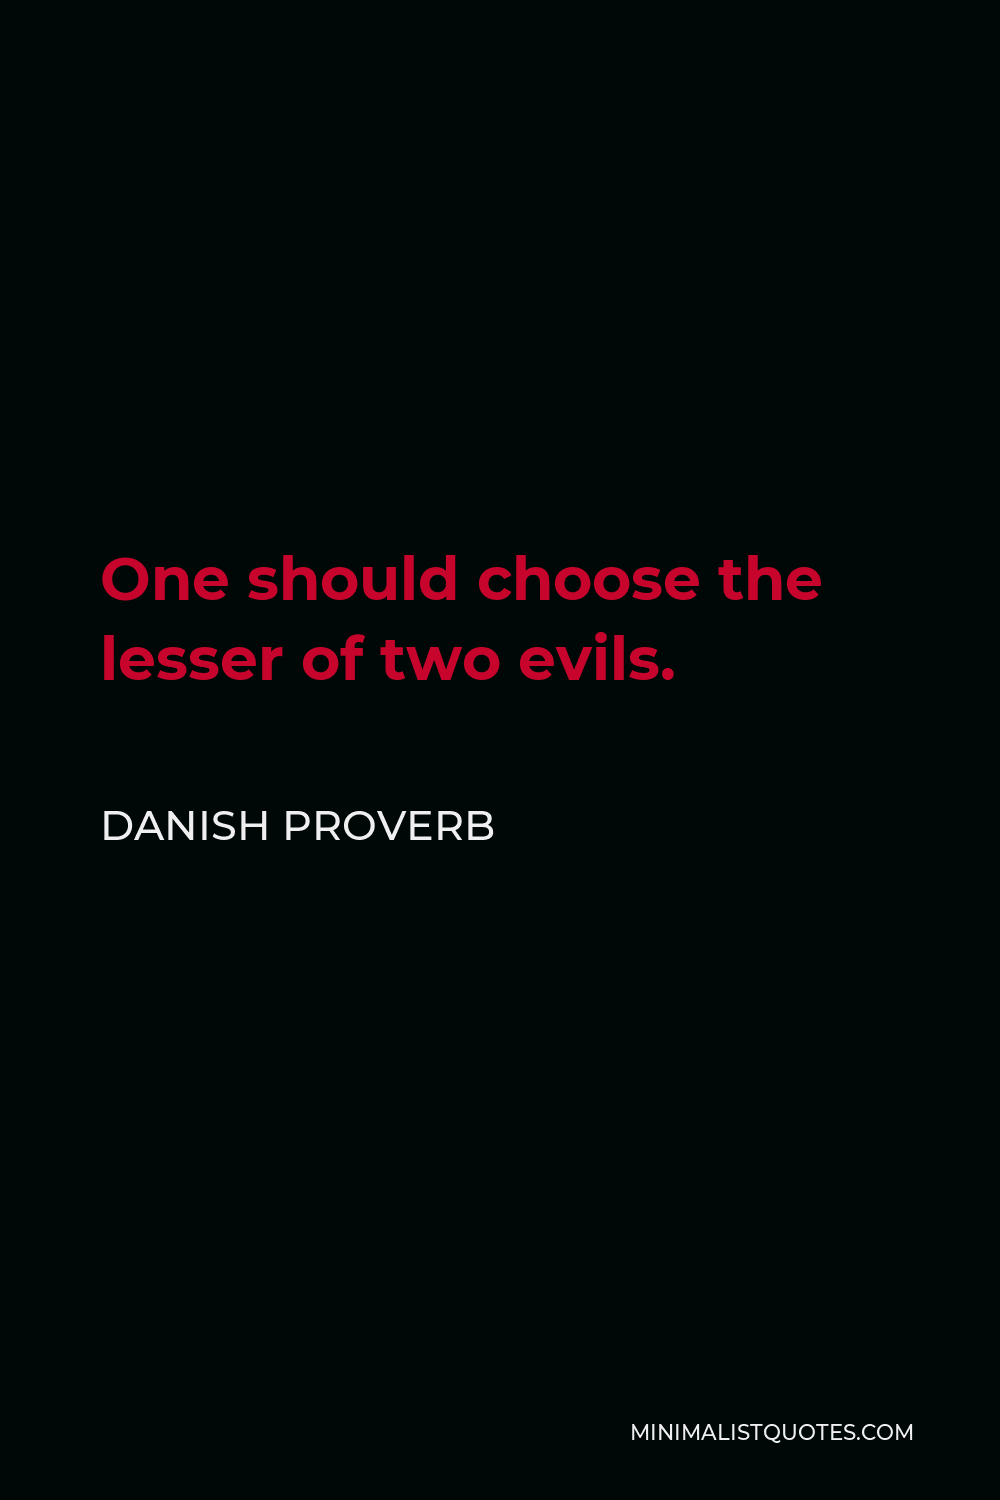 Danish Proverb Quote - One should choose the lesser of two evils.